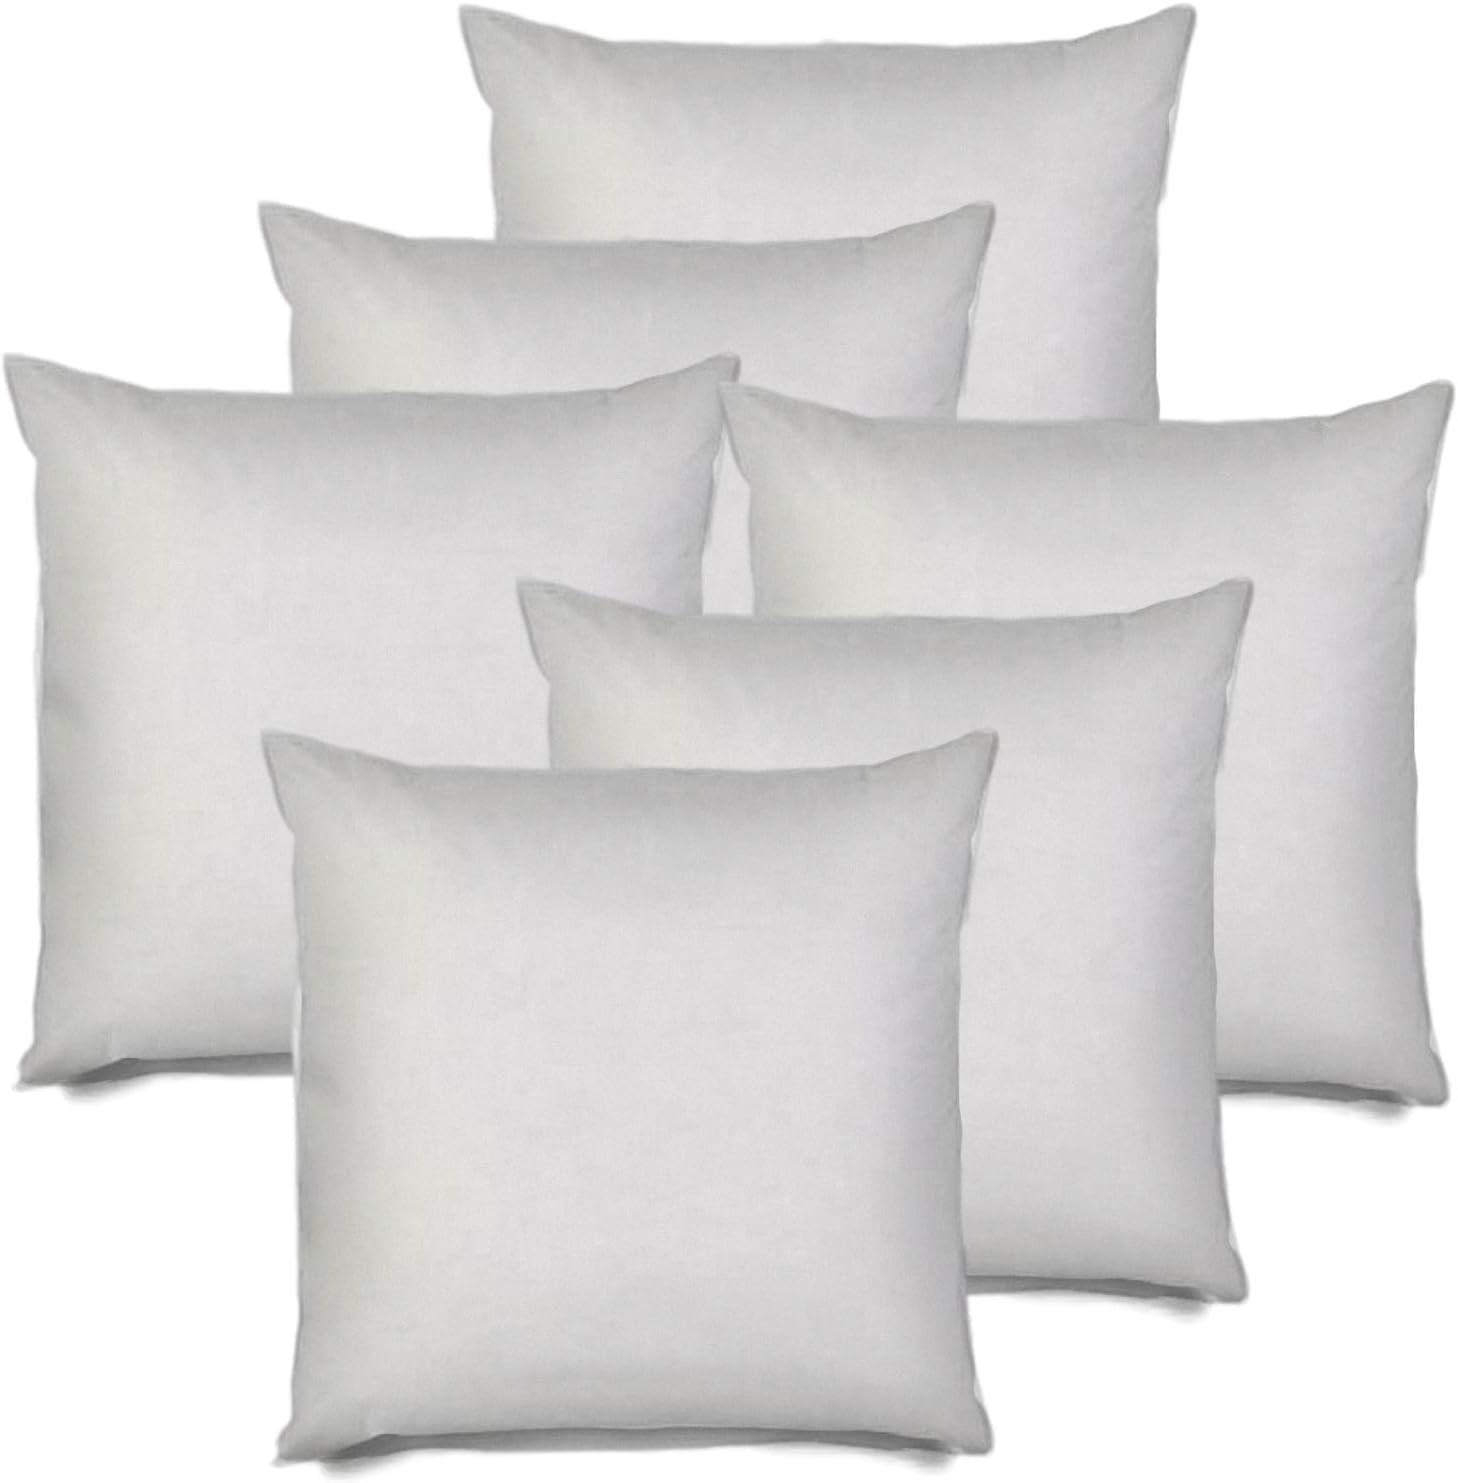 ACCENT HOME Pack of 4 pc Hypoallergenic Square Form Decorative Throw Pillow  Inserts Couch Sham Cushion Stuffer - 18 x 18 inches 